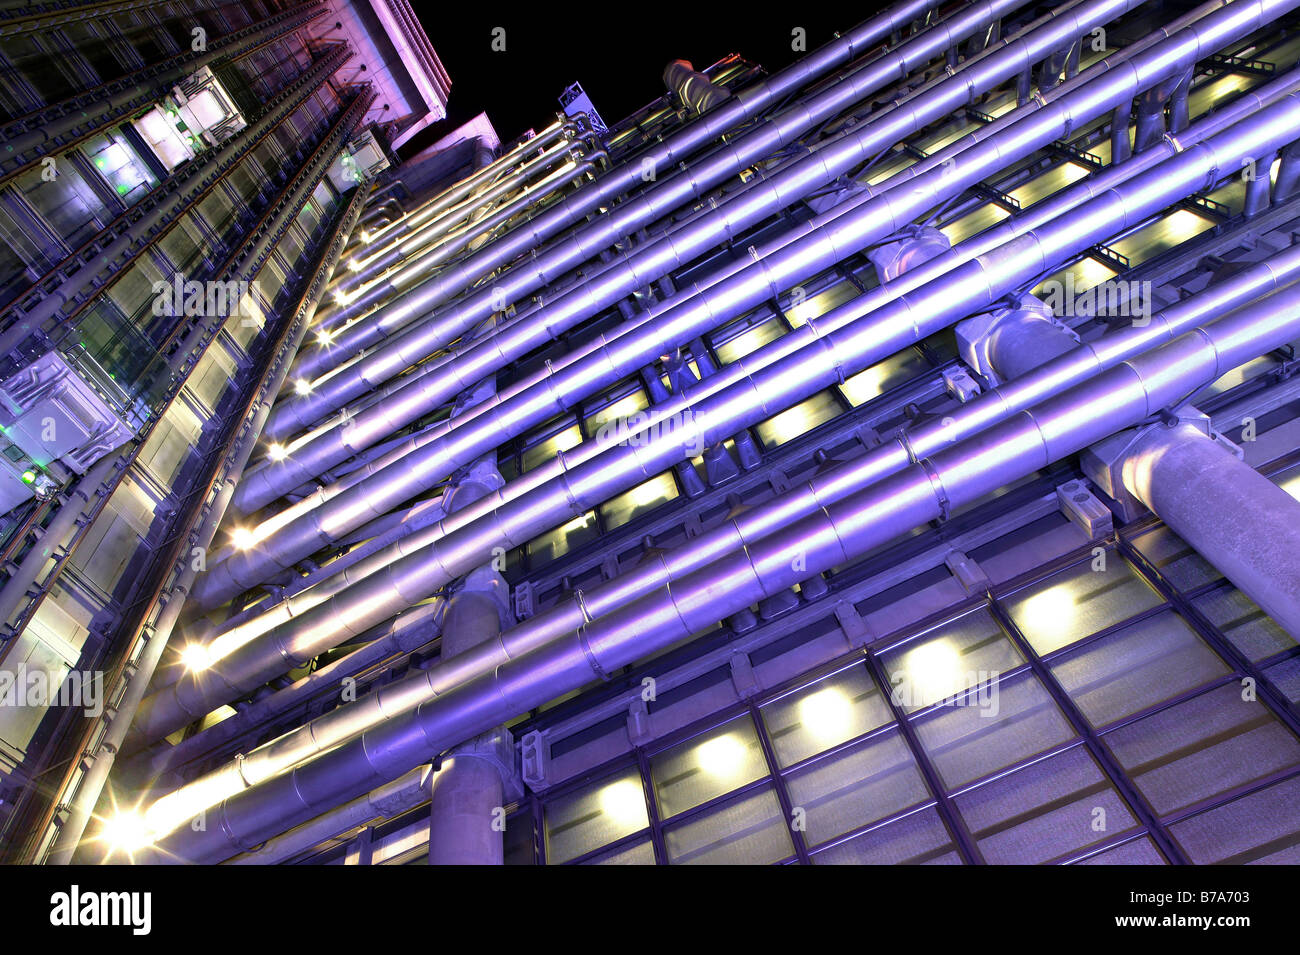 Lloyds building by the architect Richard Rogers at night, London, England, Great Britain, Europe Stock Photo